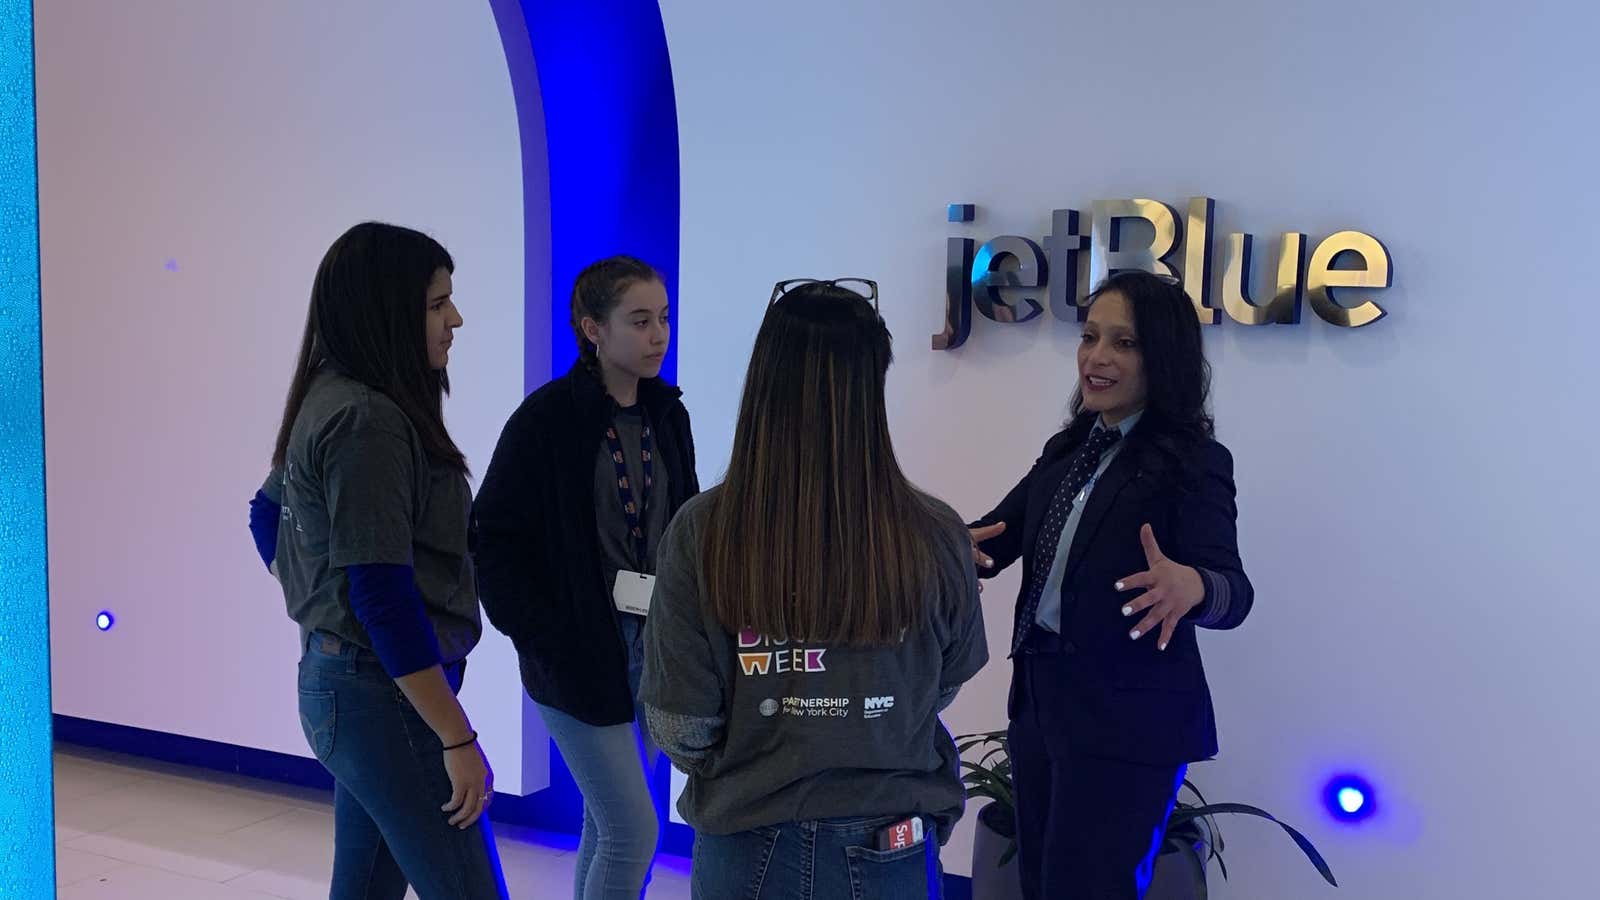 Captain Roman-Amador, a pilot for JetBlue, chats with some Queens students.